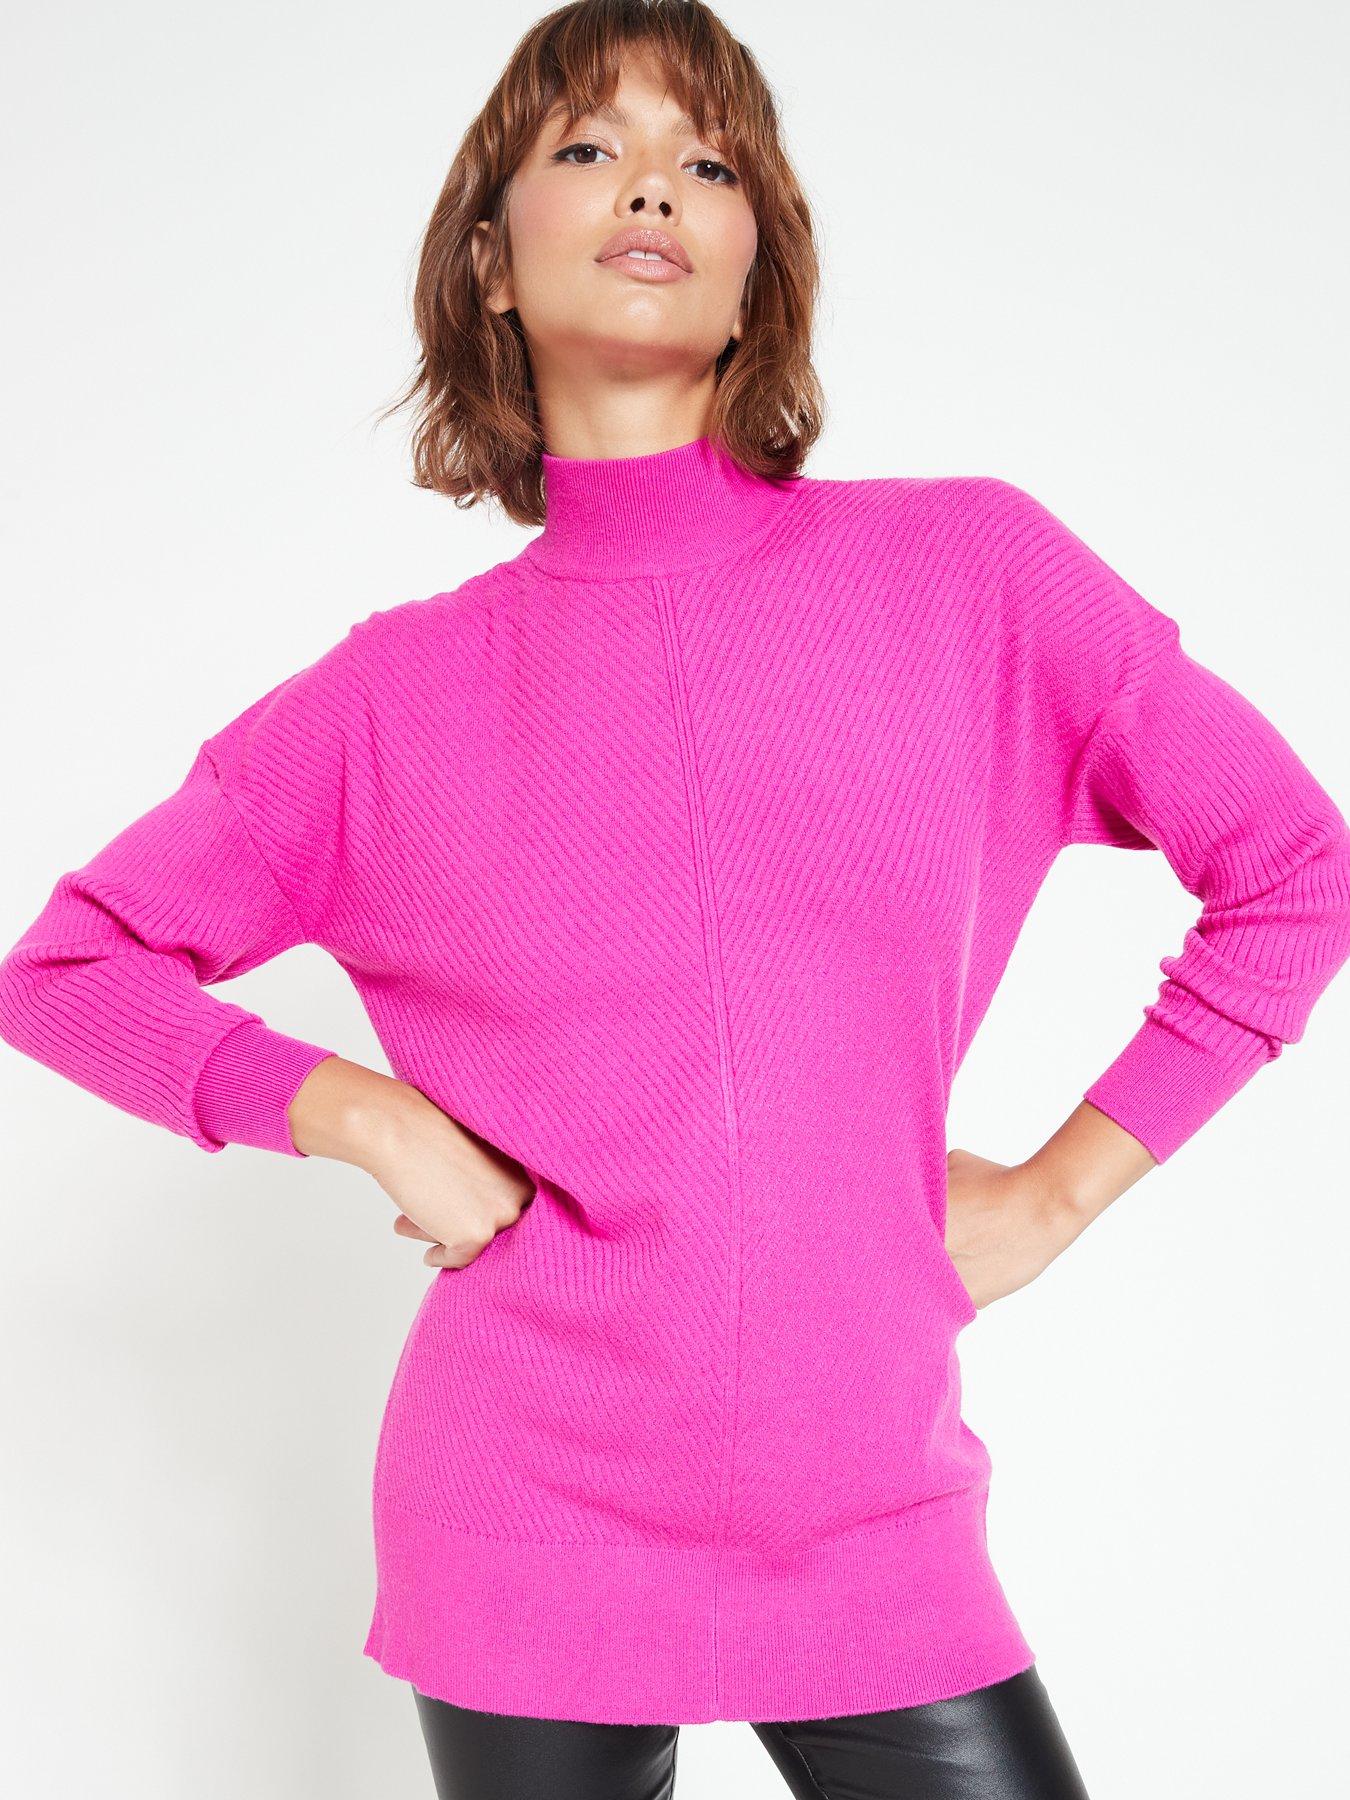 Pink Womens Clothing Jumpers and knitwear Jumpers Kaos Jumper in Fuchsia 